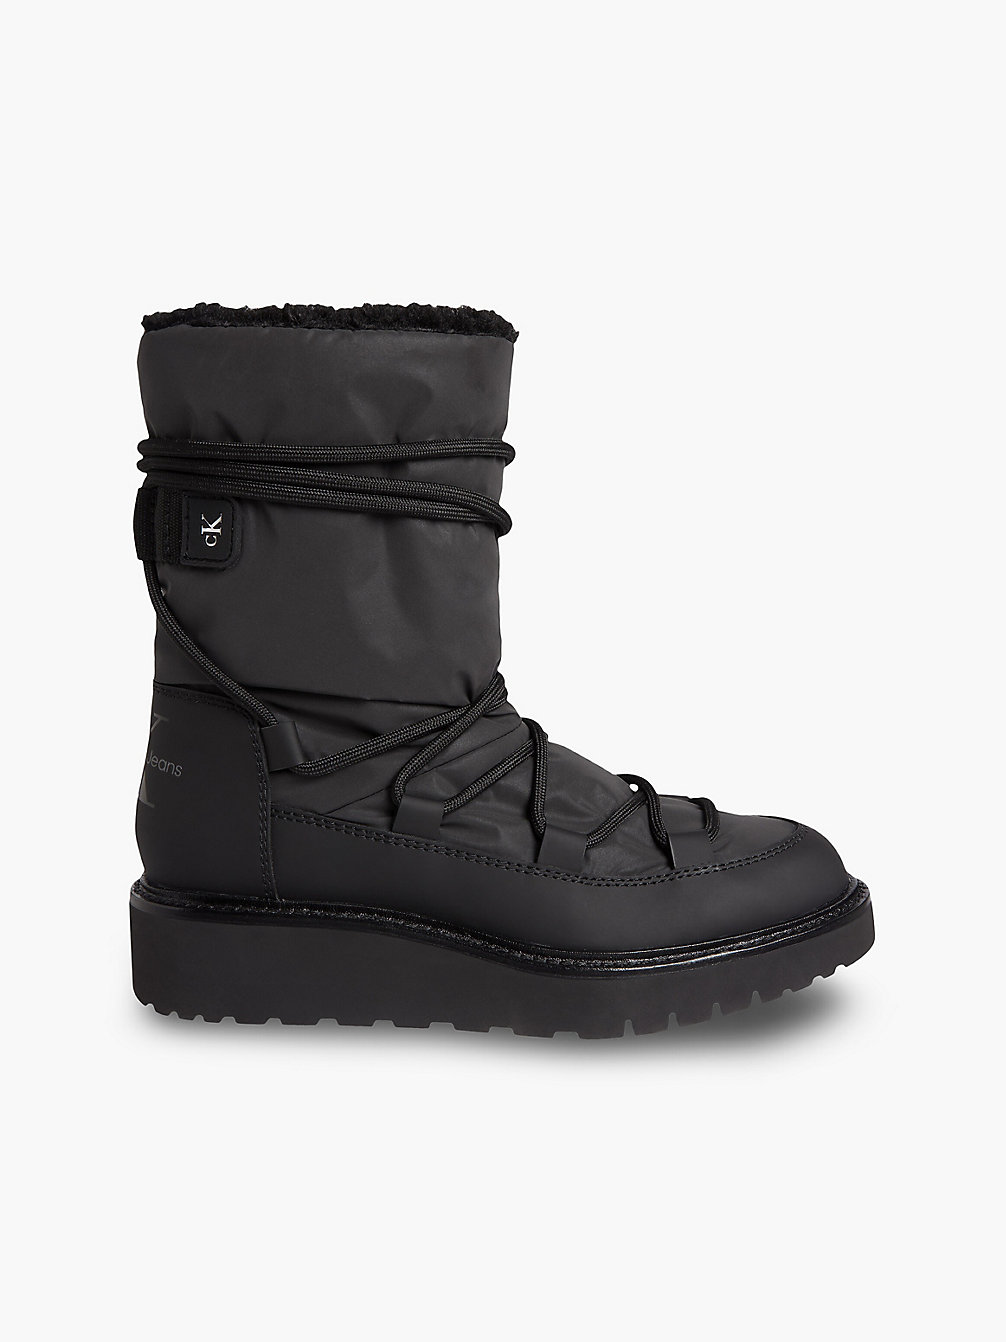 BLACK Recycled Boots undefined women Calvin Klein